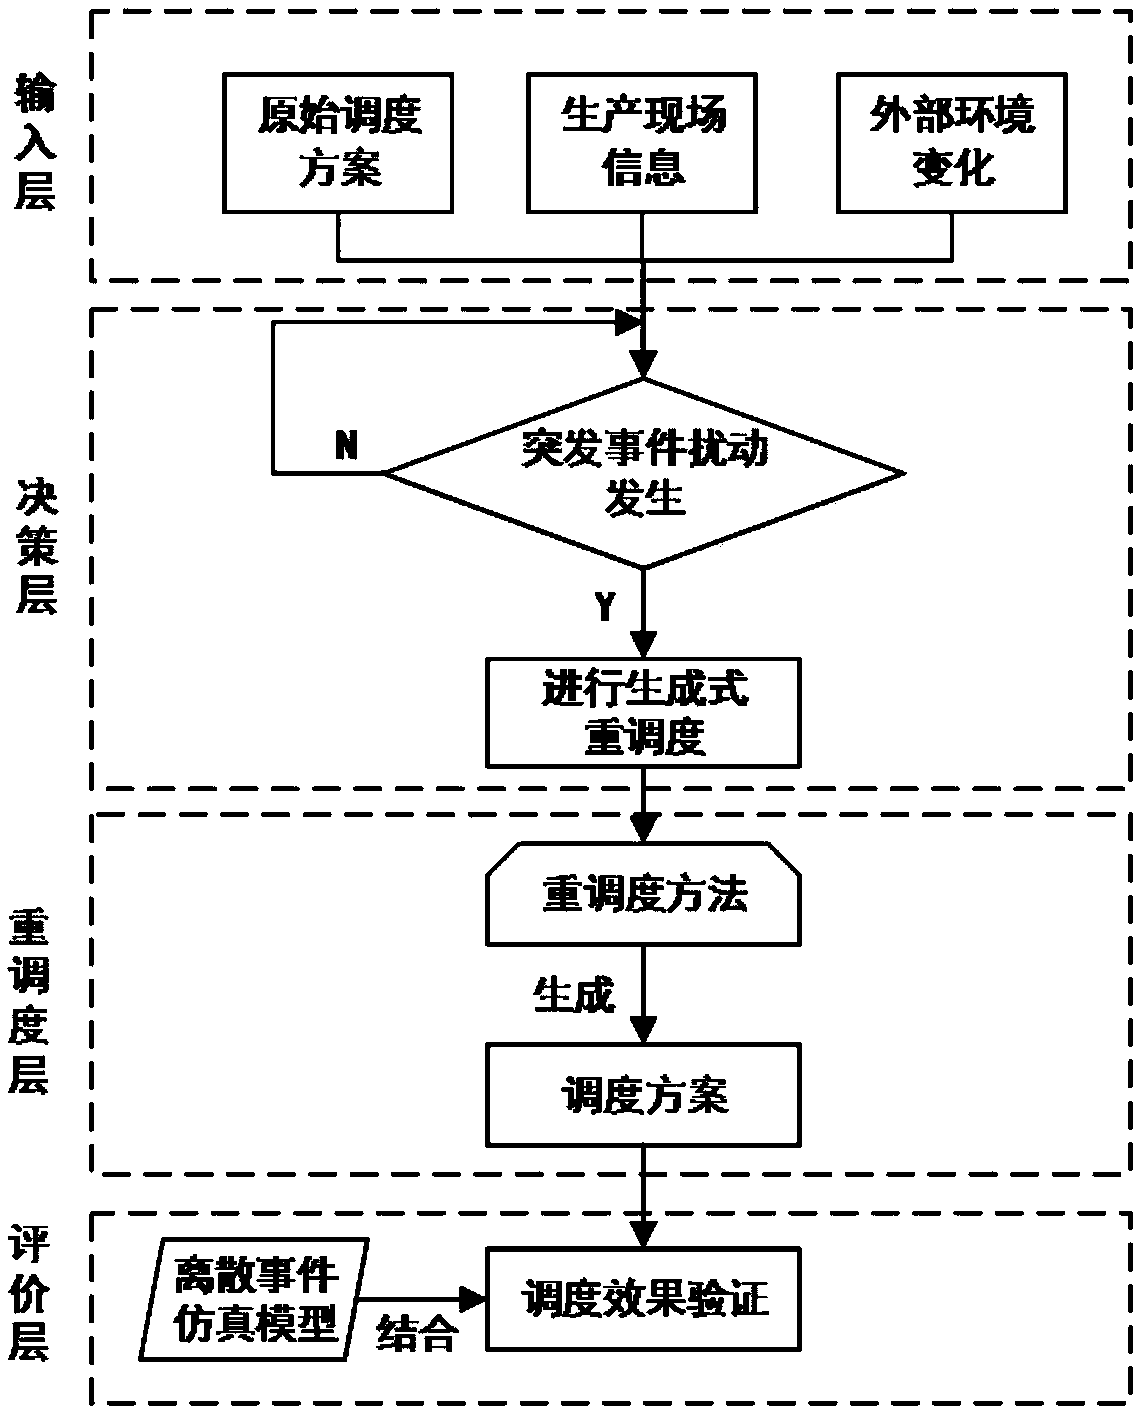 Scheduling optimization method and device in semiconductor production line CPS environment